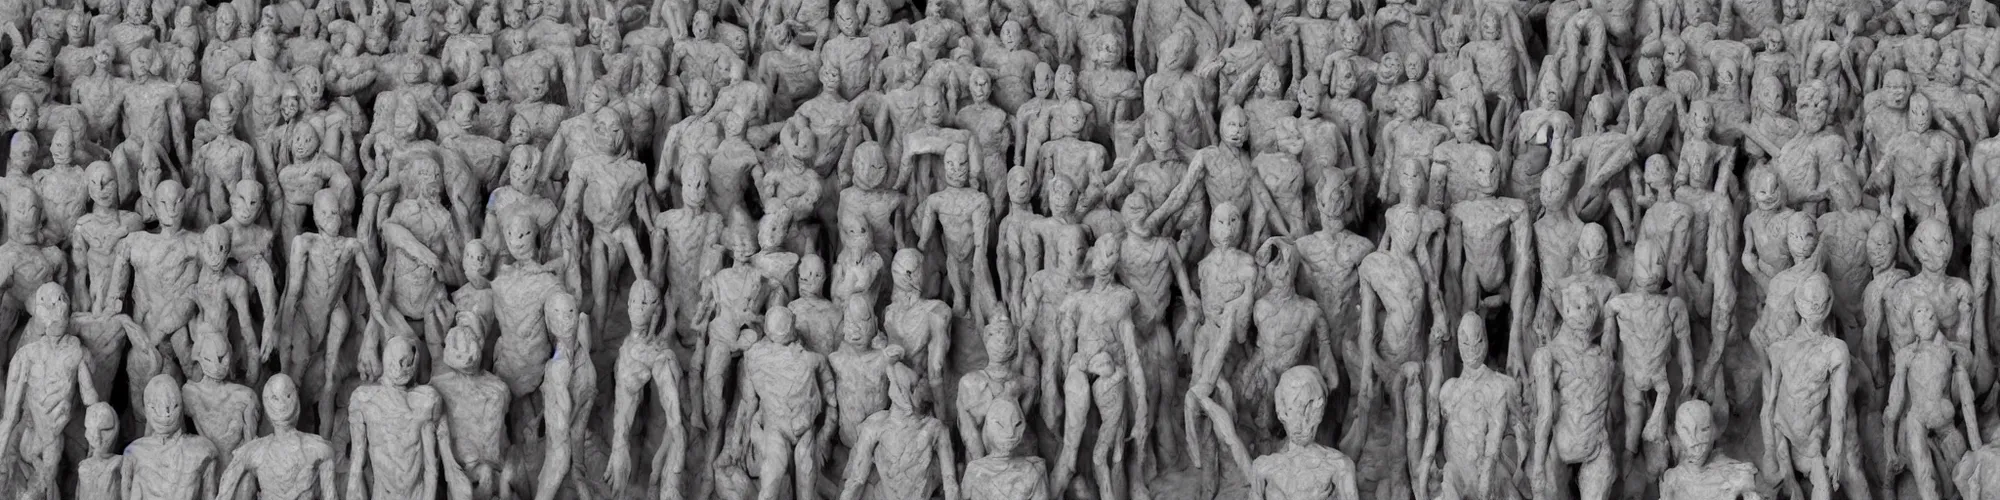 Image similar to hundreds of humans. A sea of humans. interconnected flesh. Melting clay golem humans. Dungeons&Dragons: Lemure. Lemure creature. Demonic scene. Many humans intertwined and woven together. Bodies and forms amesh. Extremely unsettling artwork. Clay sculpture by Alberto Giacometti.